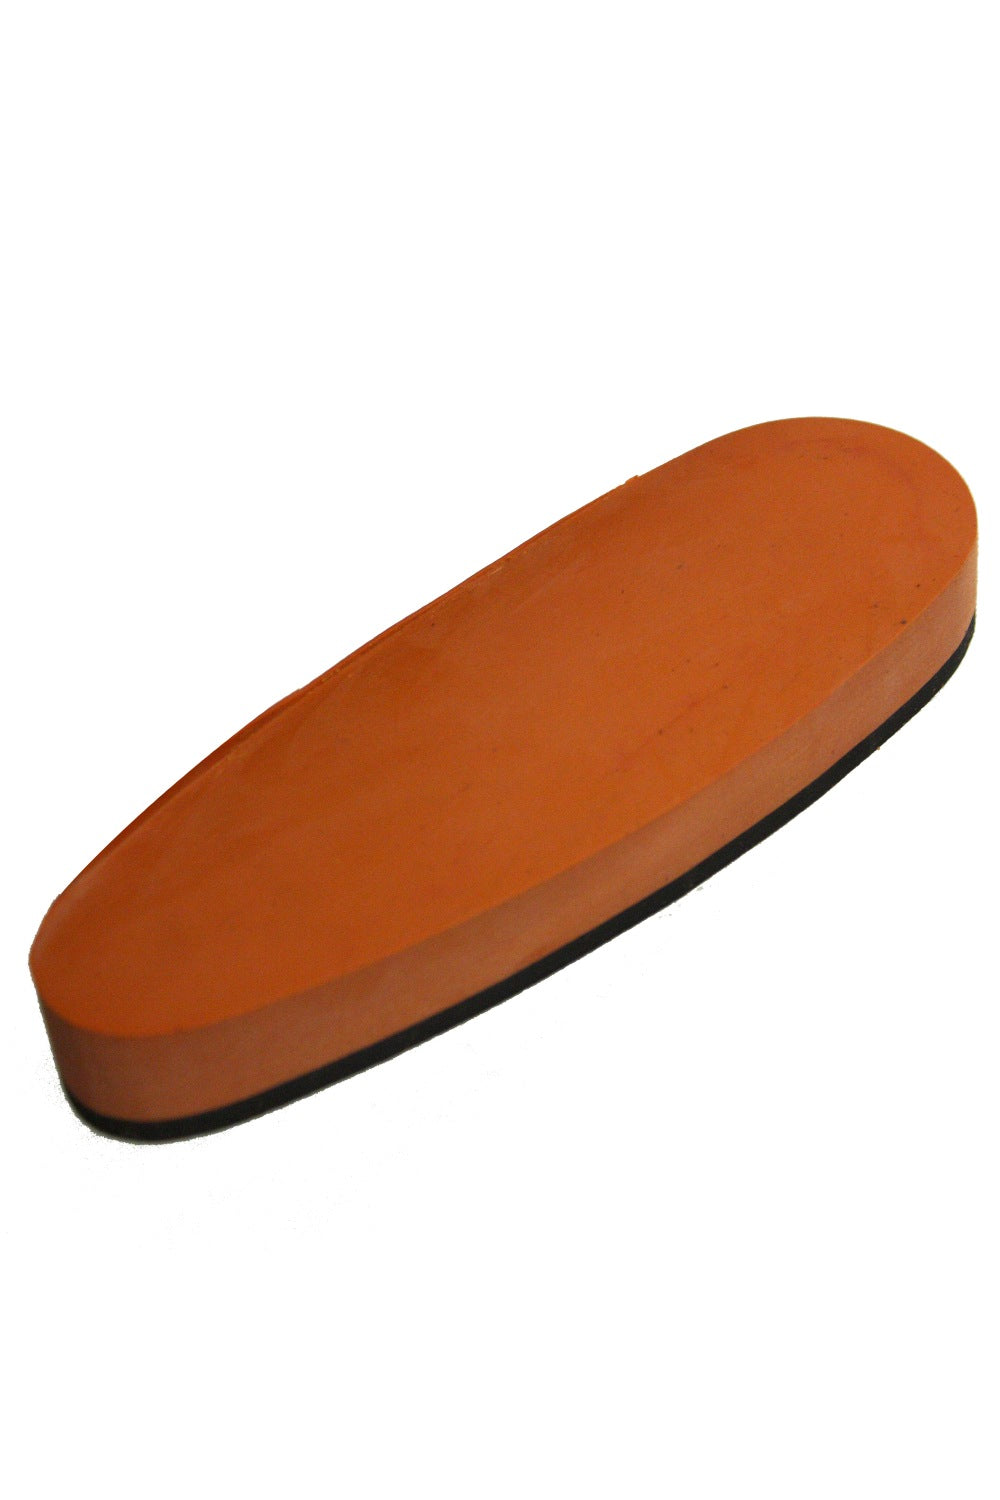 Bisley English Style Brown Recoil Pads